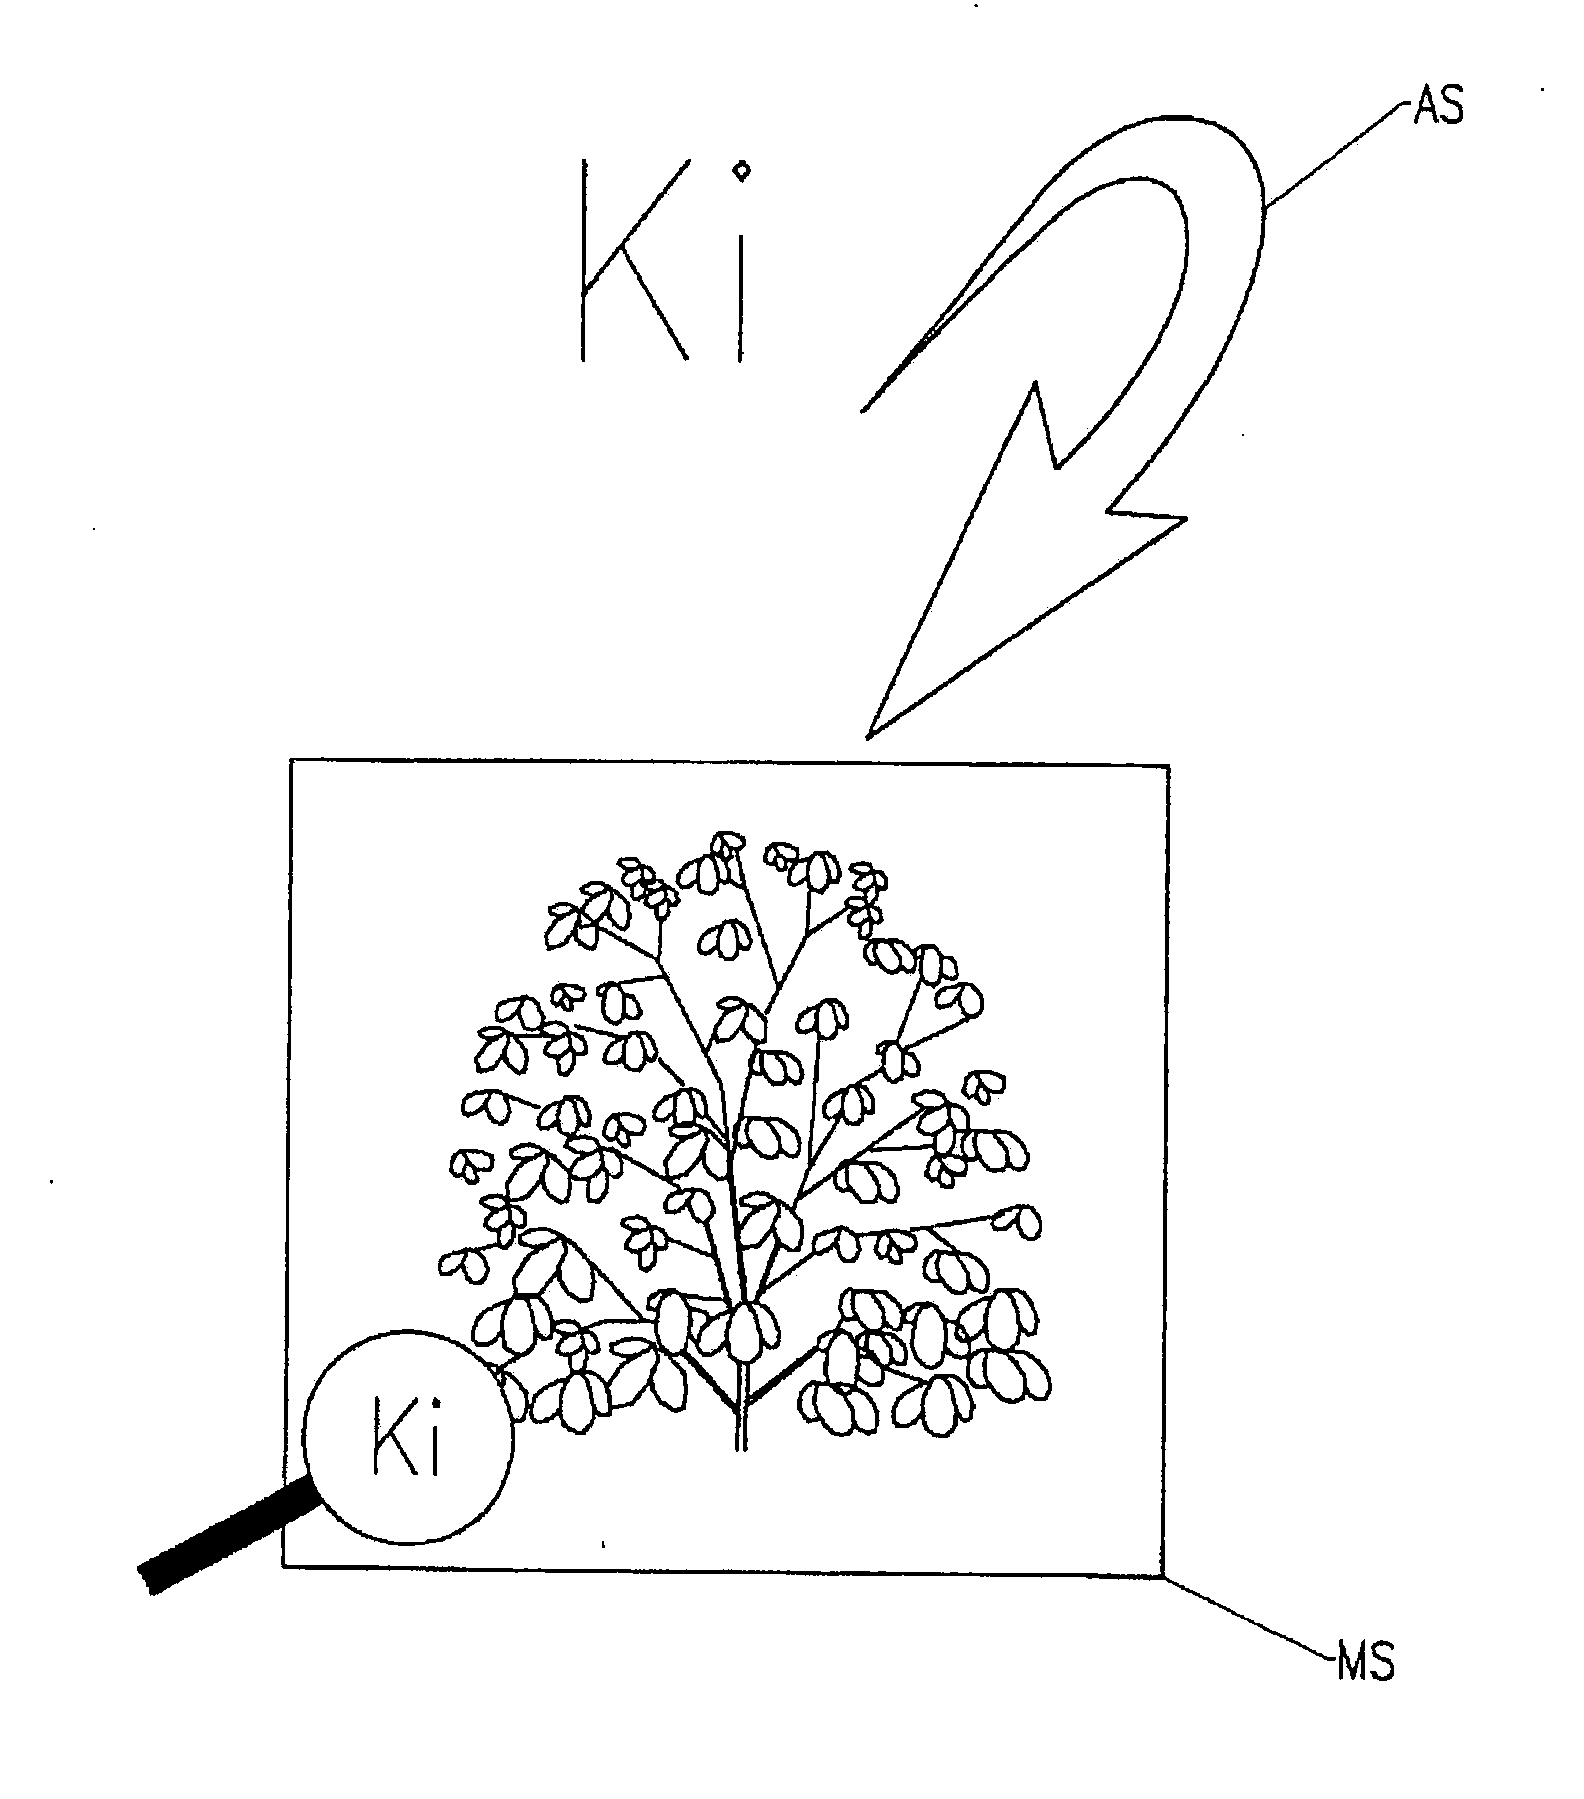 Method for authenticating a clent mobile terminal with a remote server